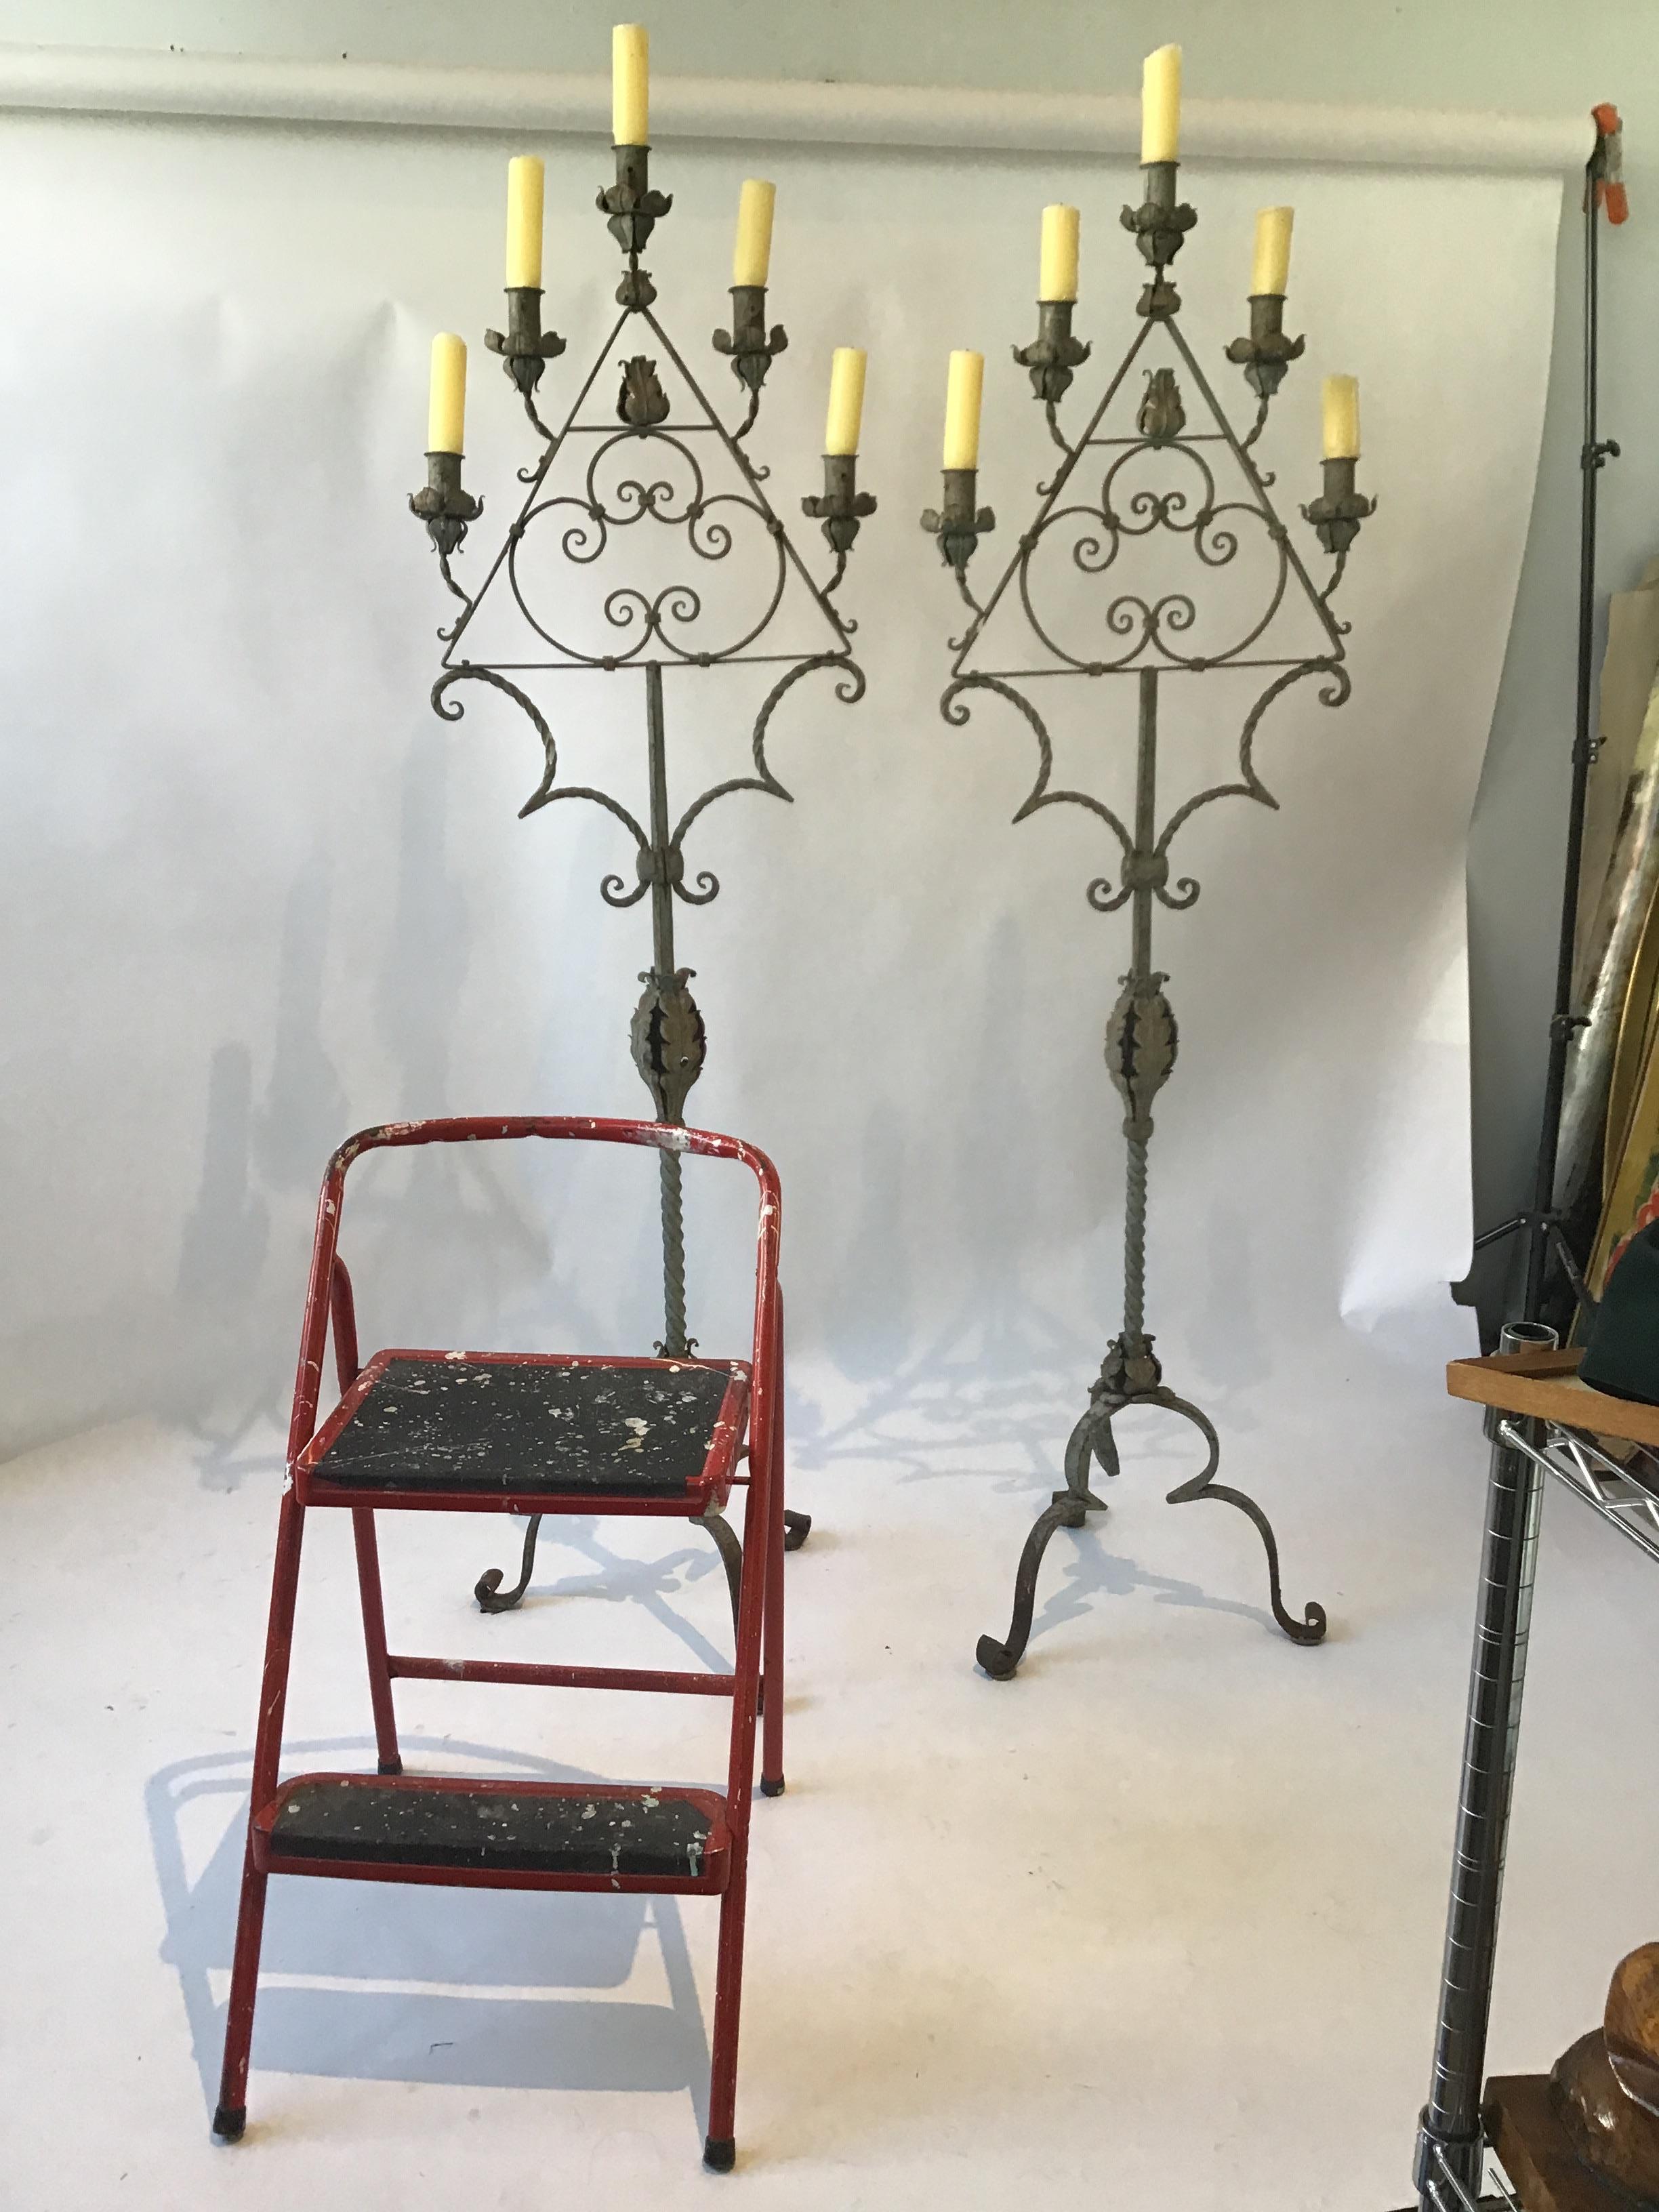 Pair of almost 6‘ high 1920s wrought iron candelabras from a Southampton, NY estate.